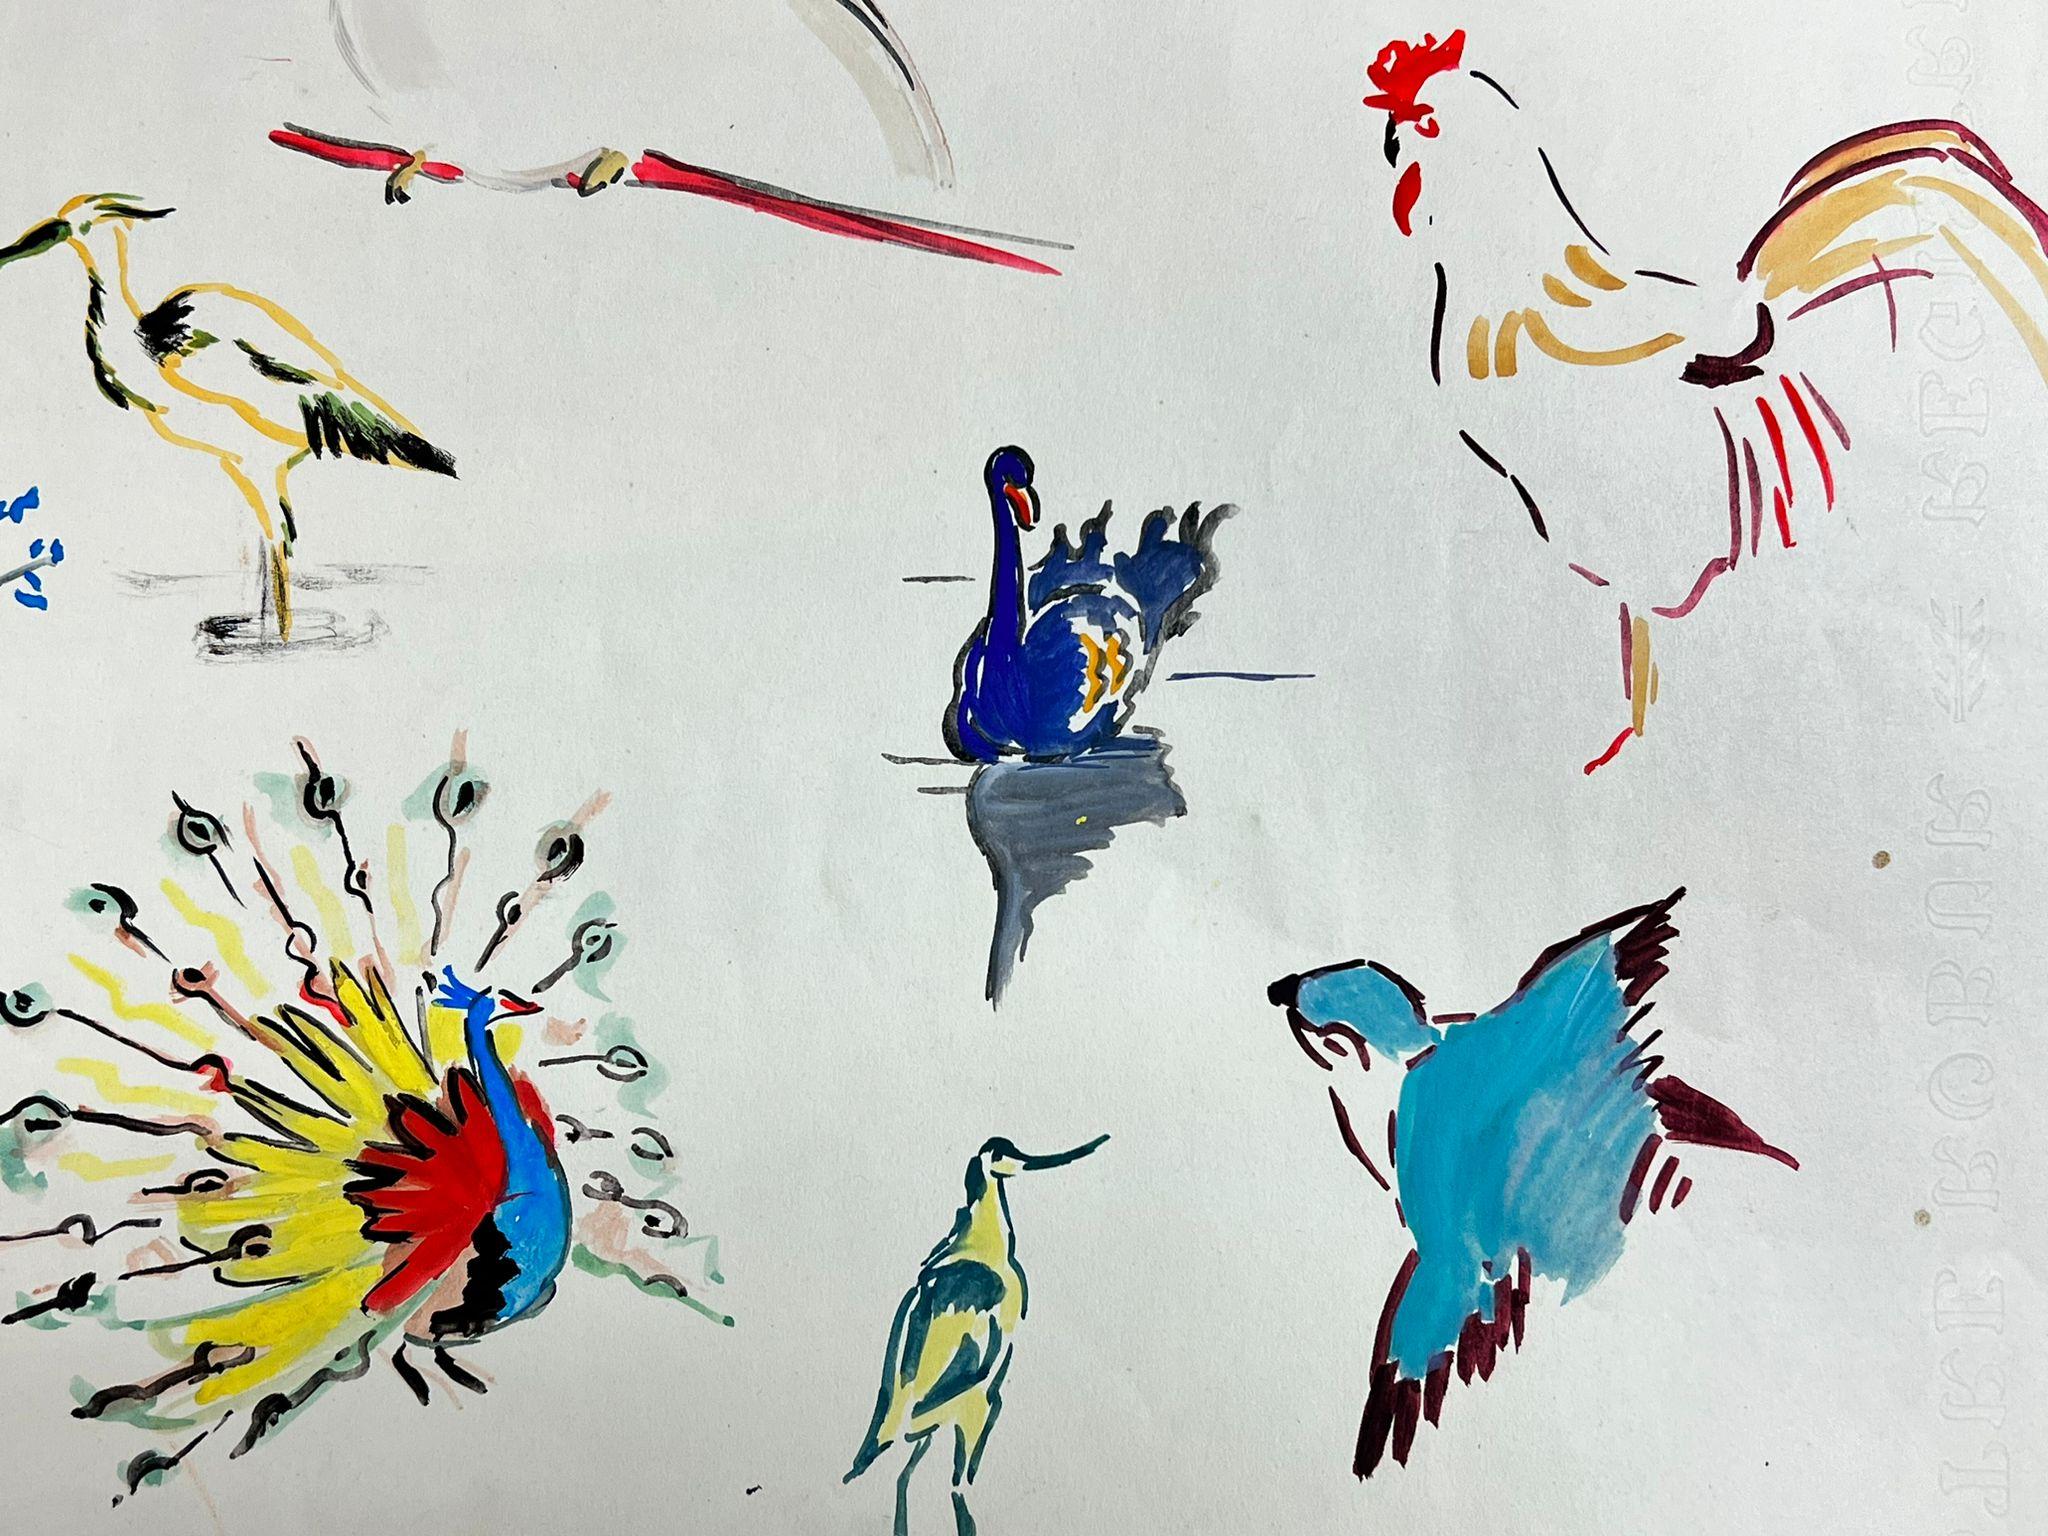 Mid Century French Illustration Sketches Of Different Colorful Birds - Post-Impressionist Painting by Josine Vignon